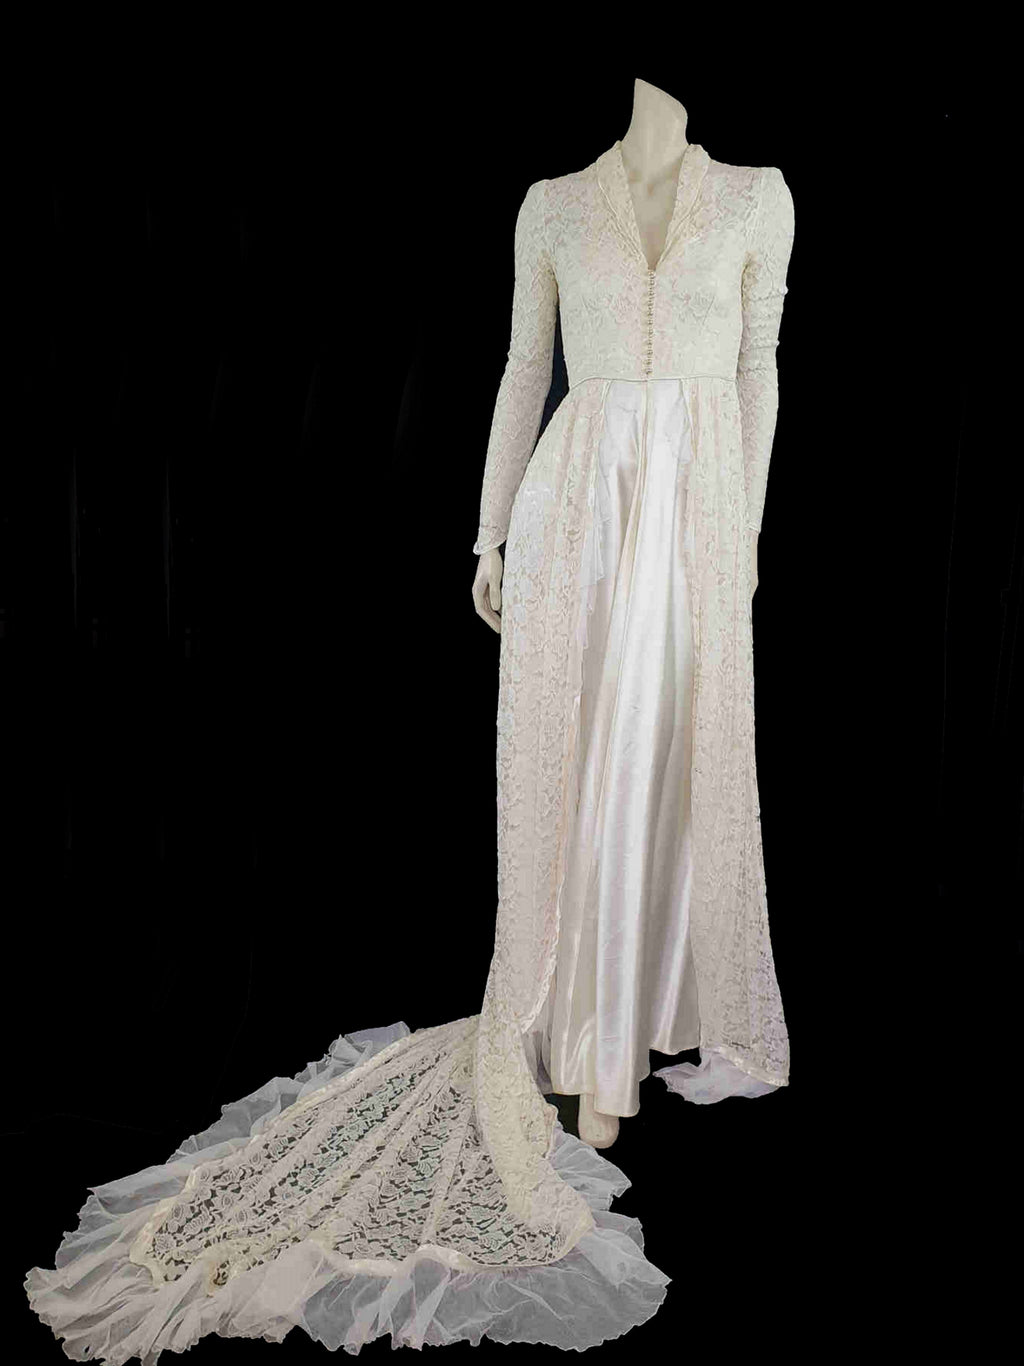 1950s vintage lace wedding gown with long train